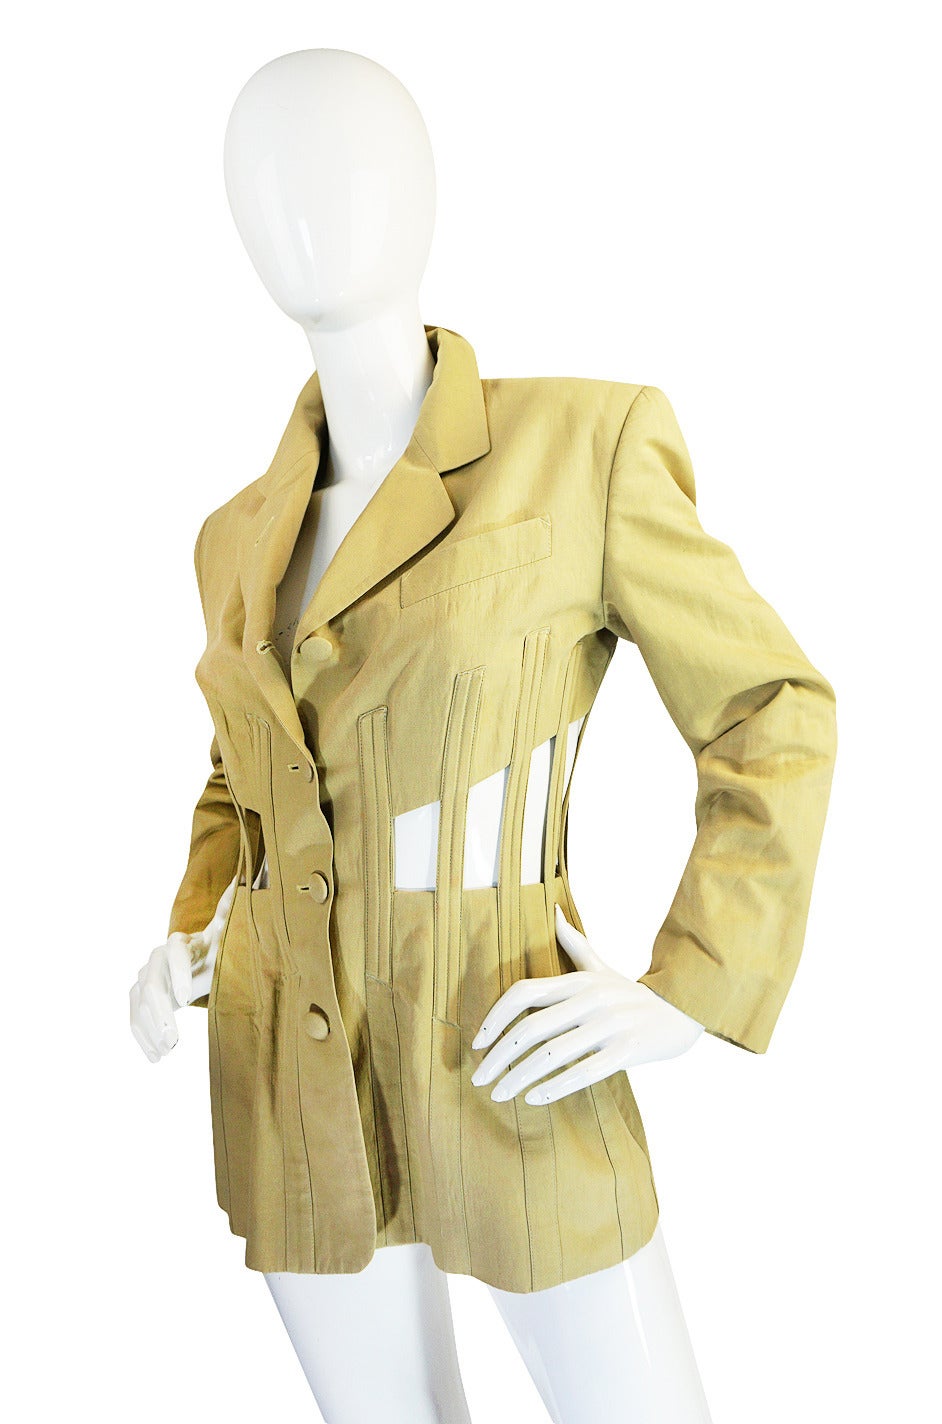 Beige 1990s Jean Paul Gaultier Cut Out Corset or Cage Jacket